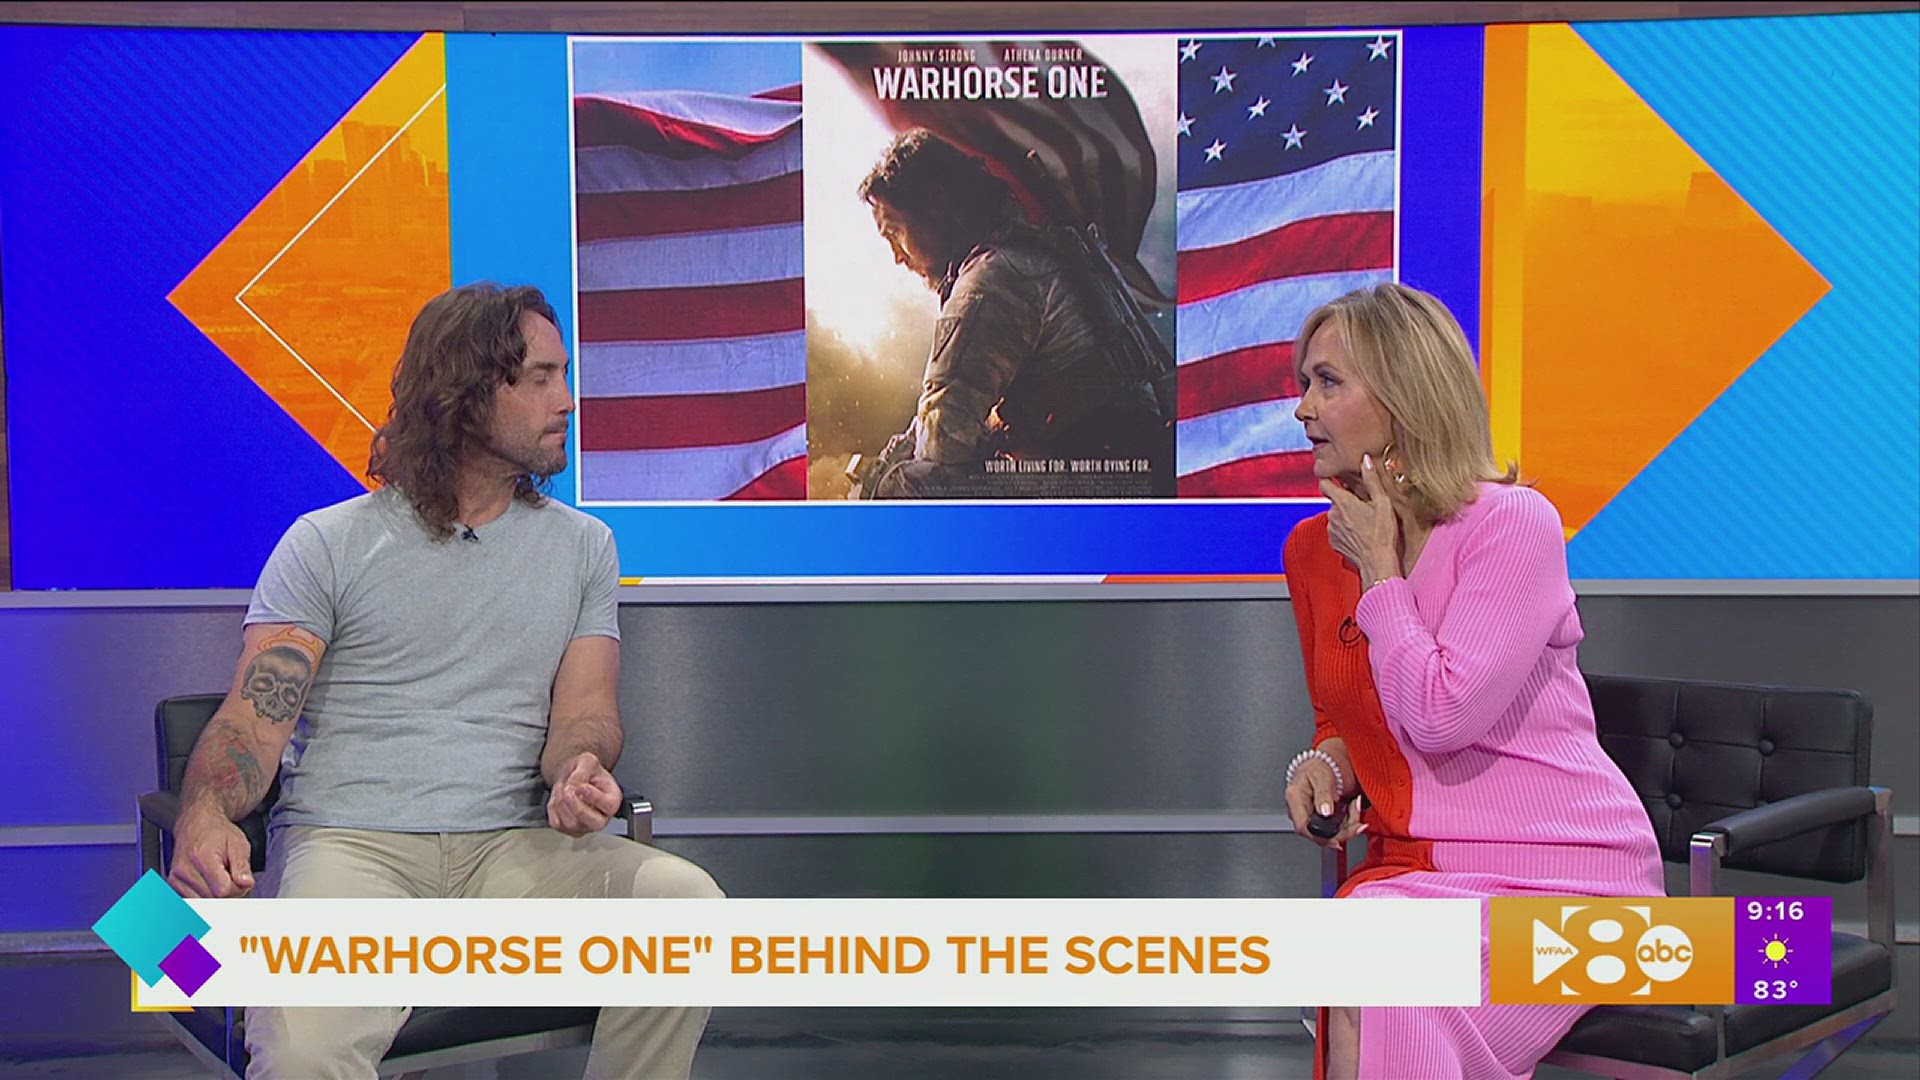 Actor, writer, and producer Johnny Strong makes his directorial debut with the film "Warhorse One".  He takes us behind the scenes of the movie filmed in Texas.